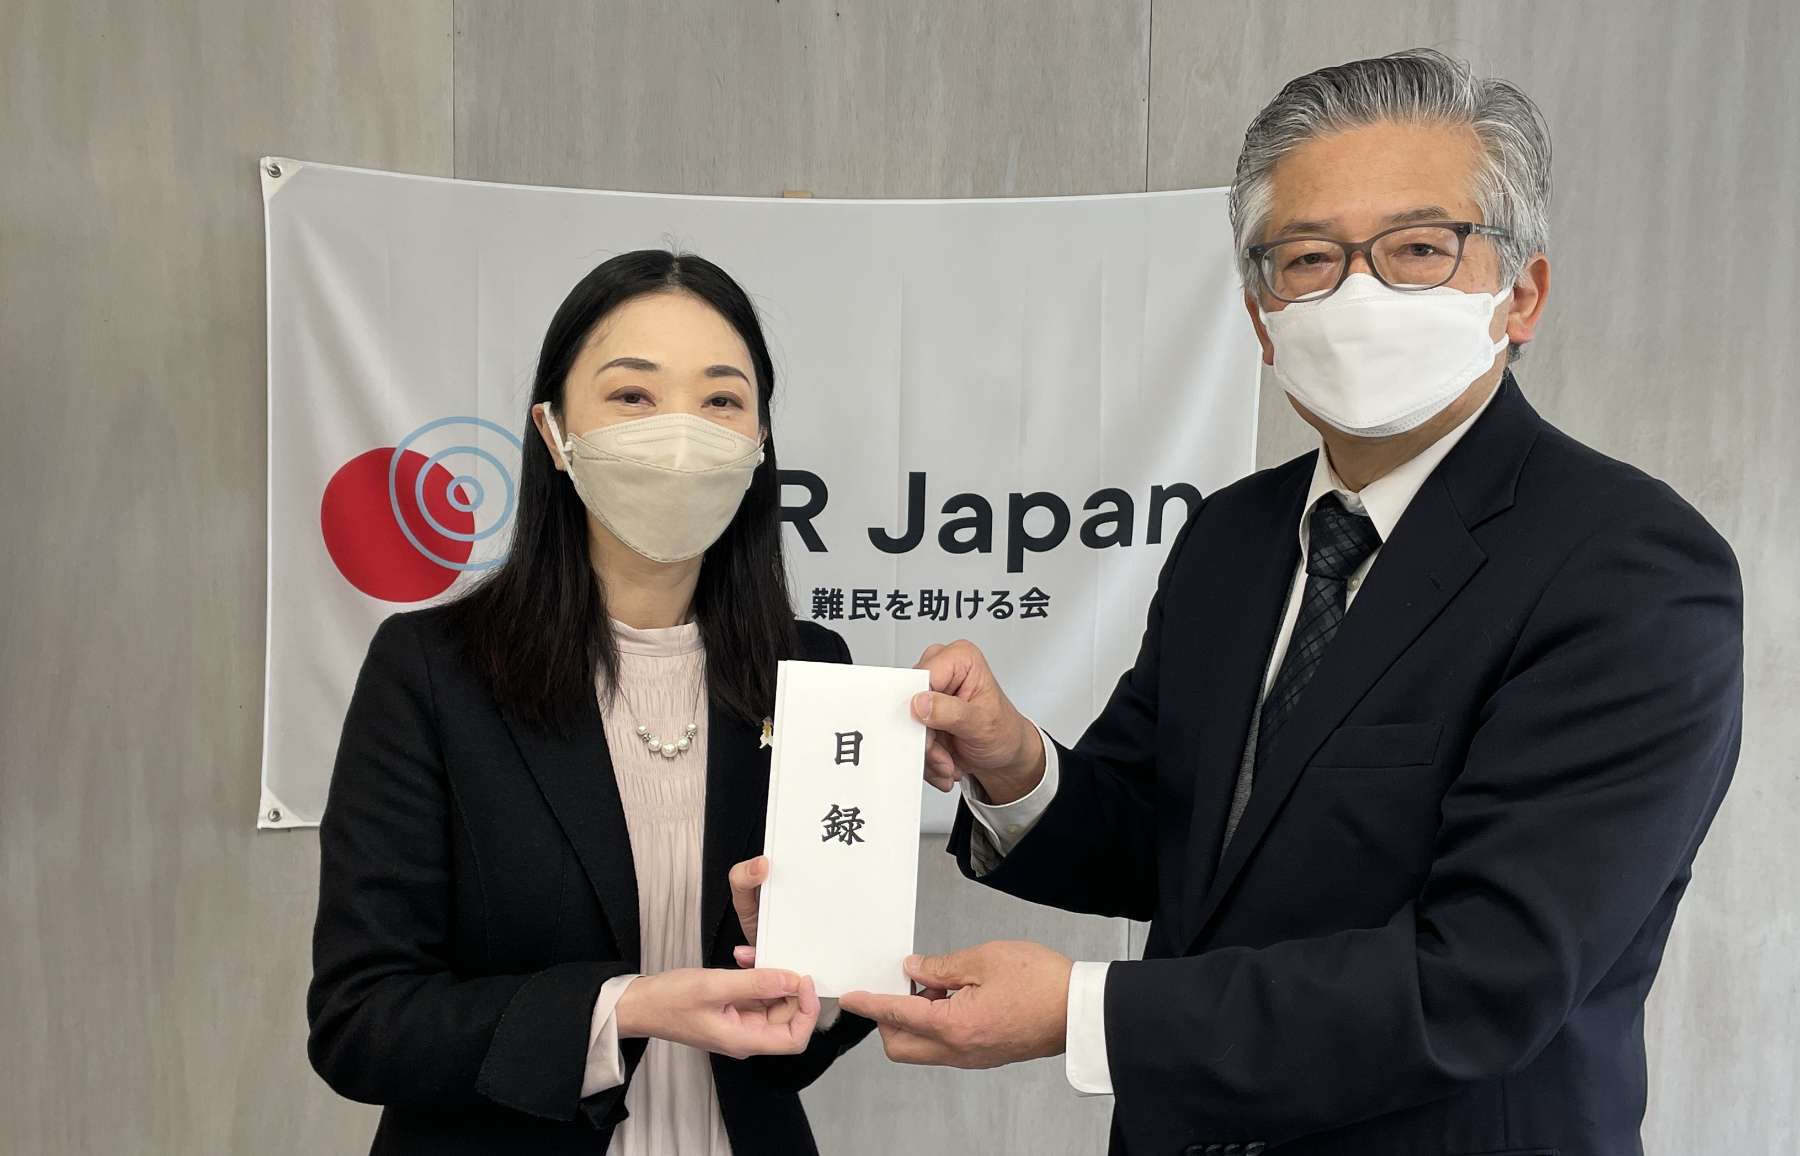 A donation list is handed over to Yuki Yoshizawa, acting secretary general (left in the photo), by a representative of Shinnyo-en.